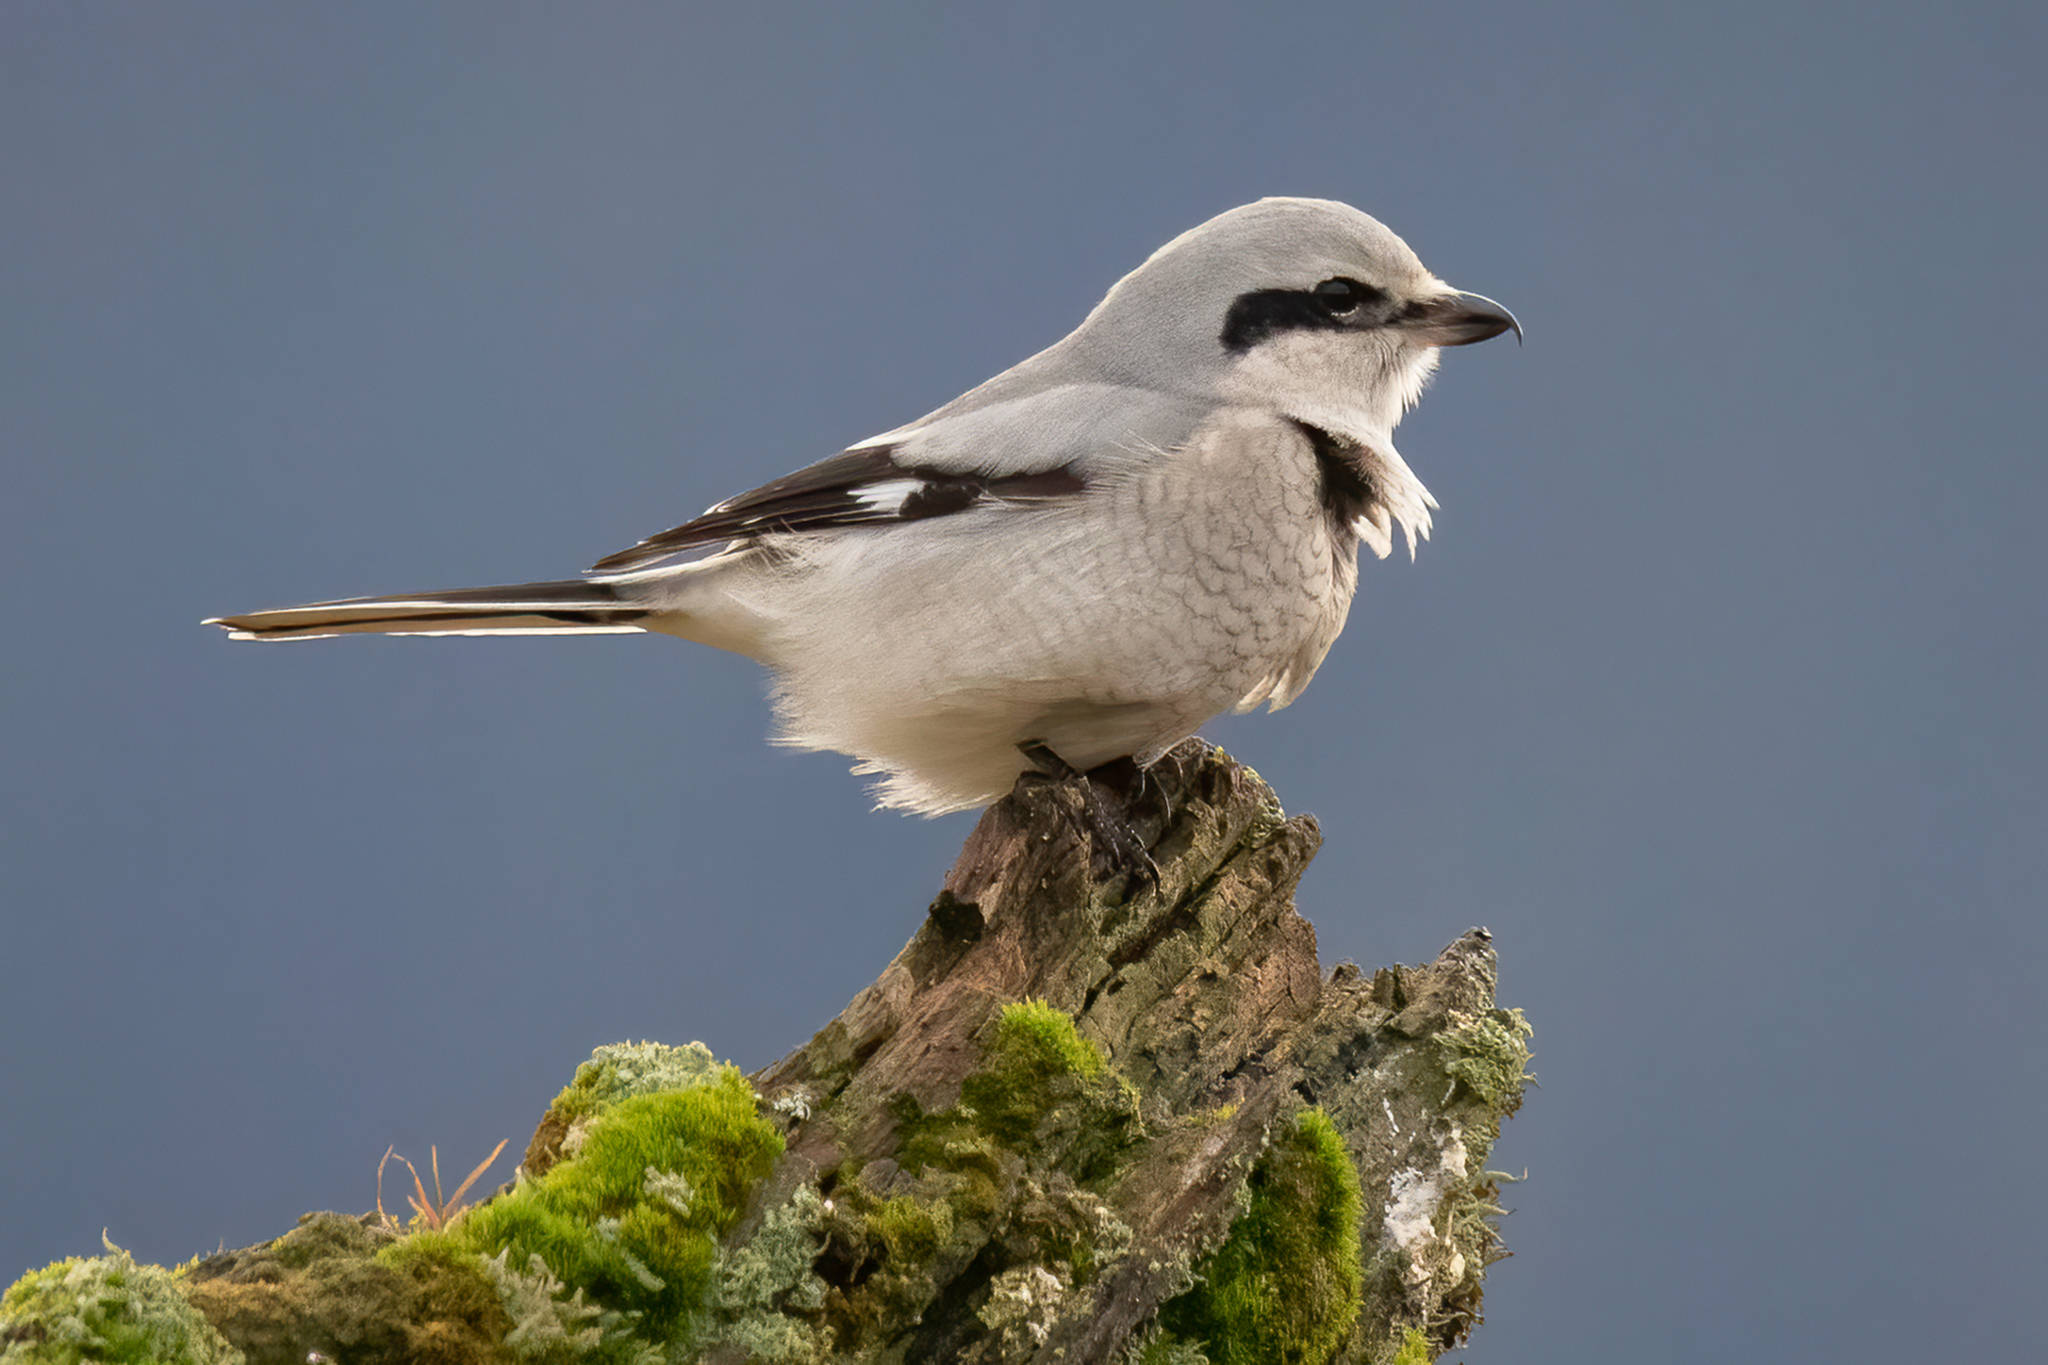 A northern shrike poses on a stump-garden of moss and lichen in the wetlands. Sometimes called “butcher birds,” northern shrikes are sizable songbirds that can catch prey larger than themselves (Courtesy Photo / Kerry Howard)